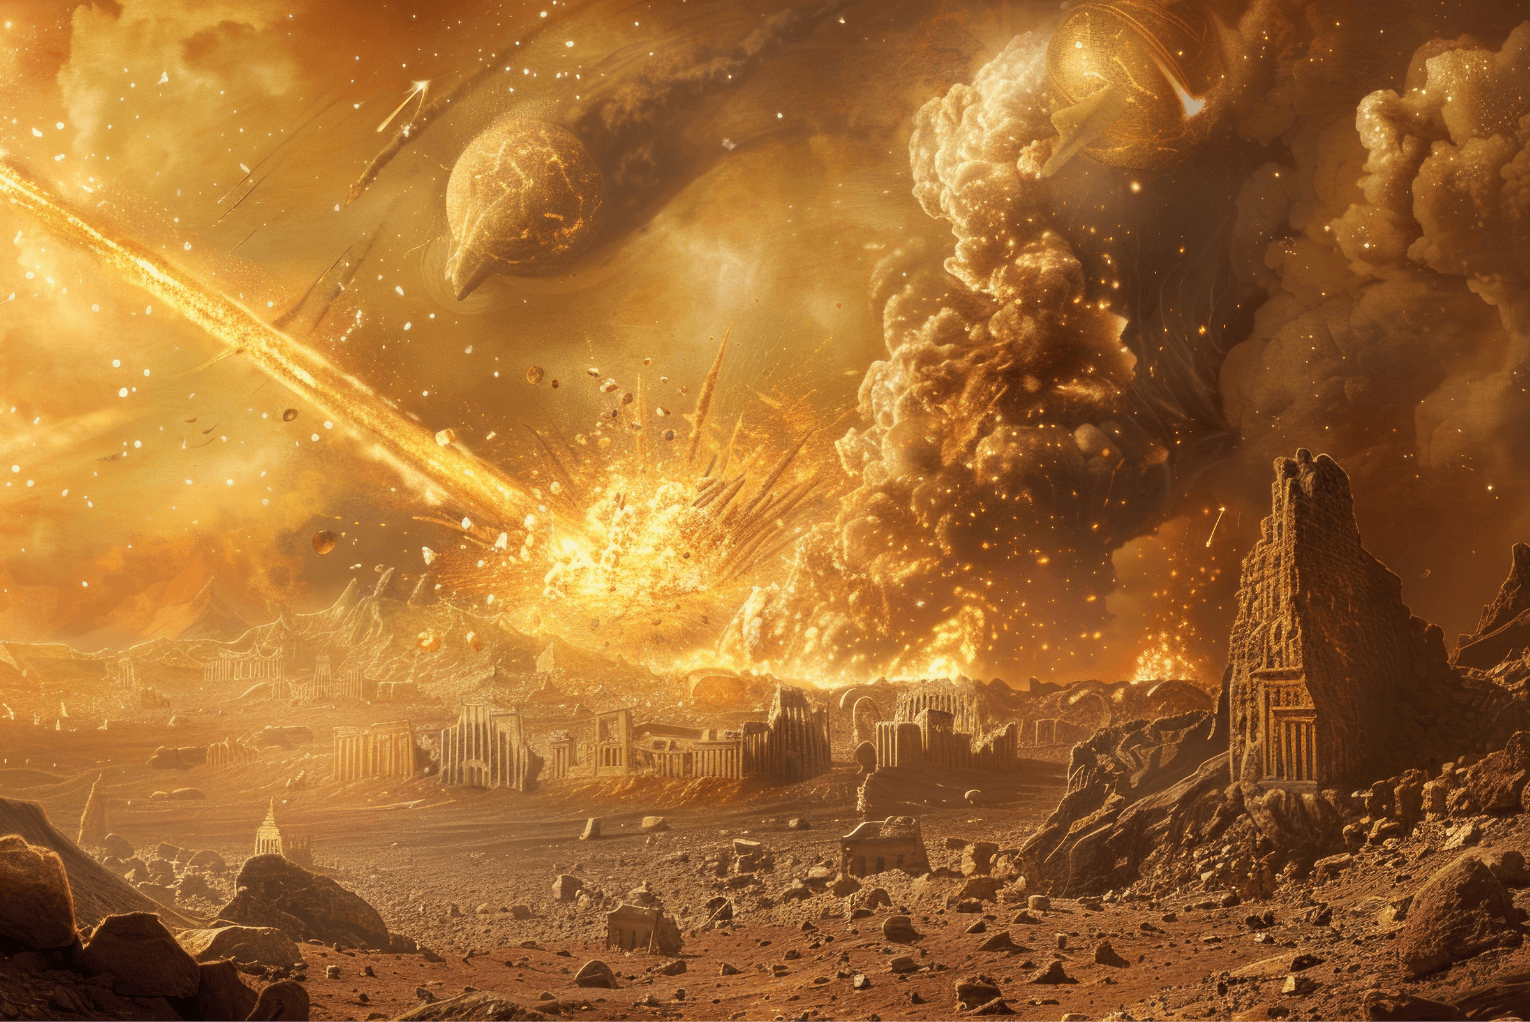 The Sodom and Gomorrah Warning: ‘We Need a Wakeup Call in America’